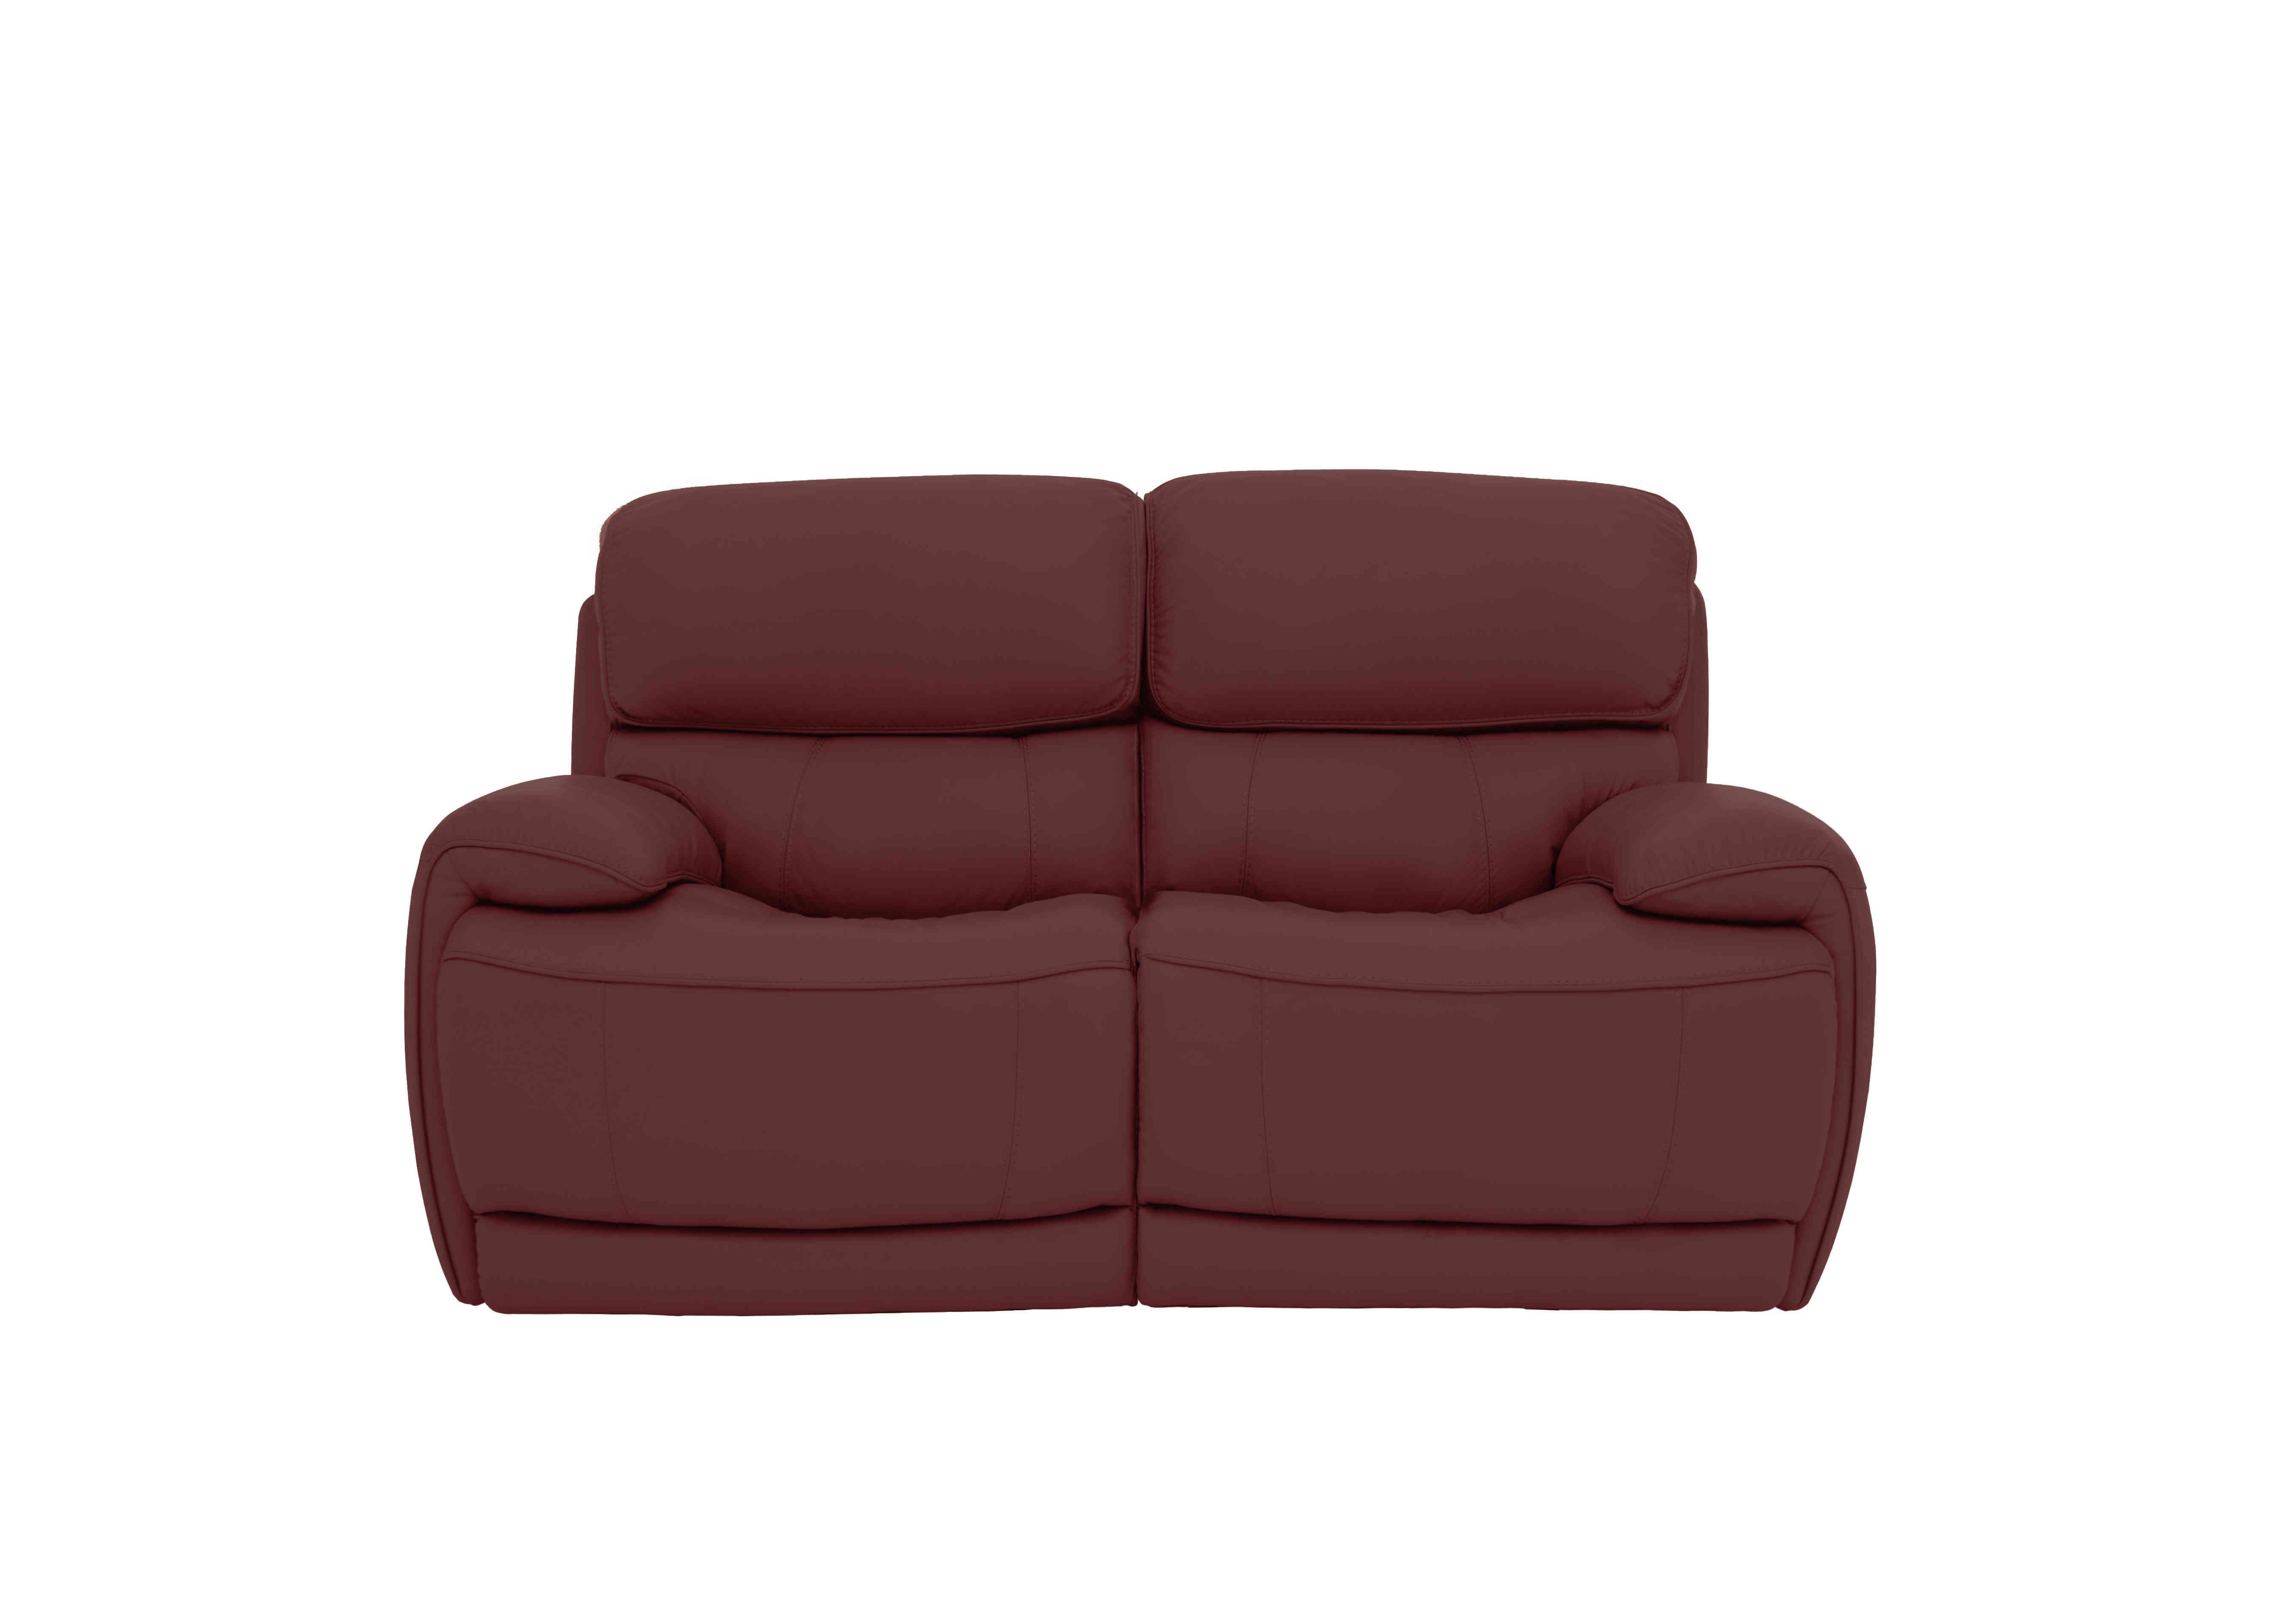 Rocco 2 Seater Leather Power Rocker Sofa with Power Headrests in Bv-035c Deep Red on Furniture Village